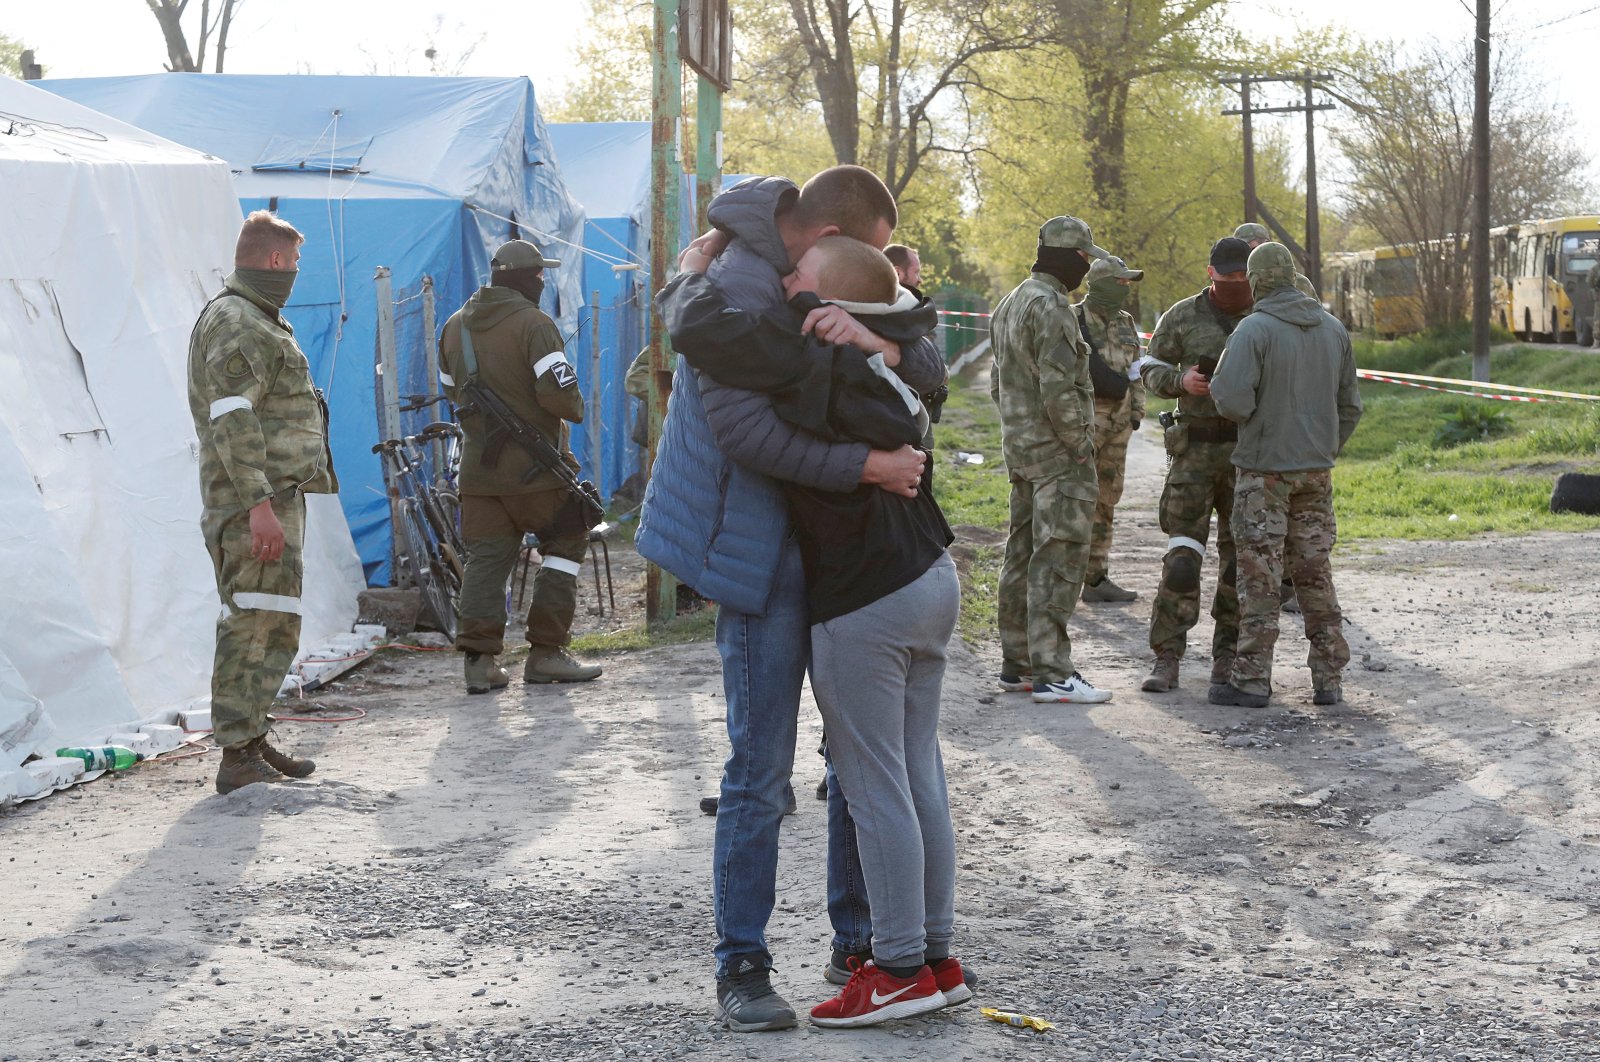 Azovstal steel plant employee Maxim, last name withheld, evacuated from Mariupol, hugs his son Matvey, who had earlier left the city with his relatives, as they meet at a temporary accommodation center during the Ukraine-Russia conflict in the village of Bezimenne in the Donetsk region, Ukraine May 1, 2022. (Reuters Photo)